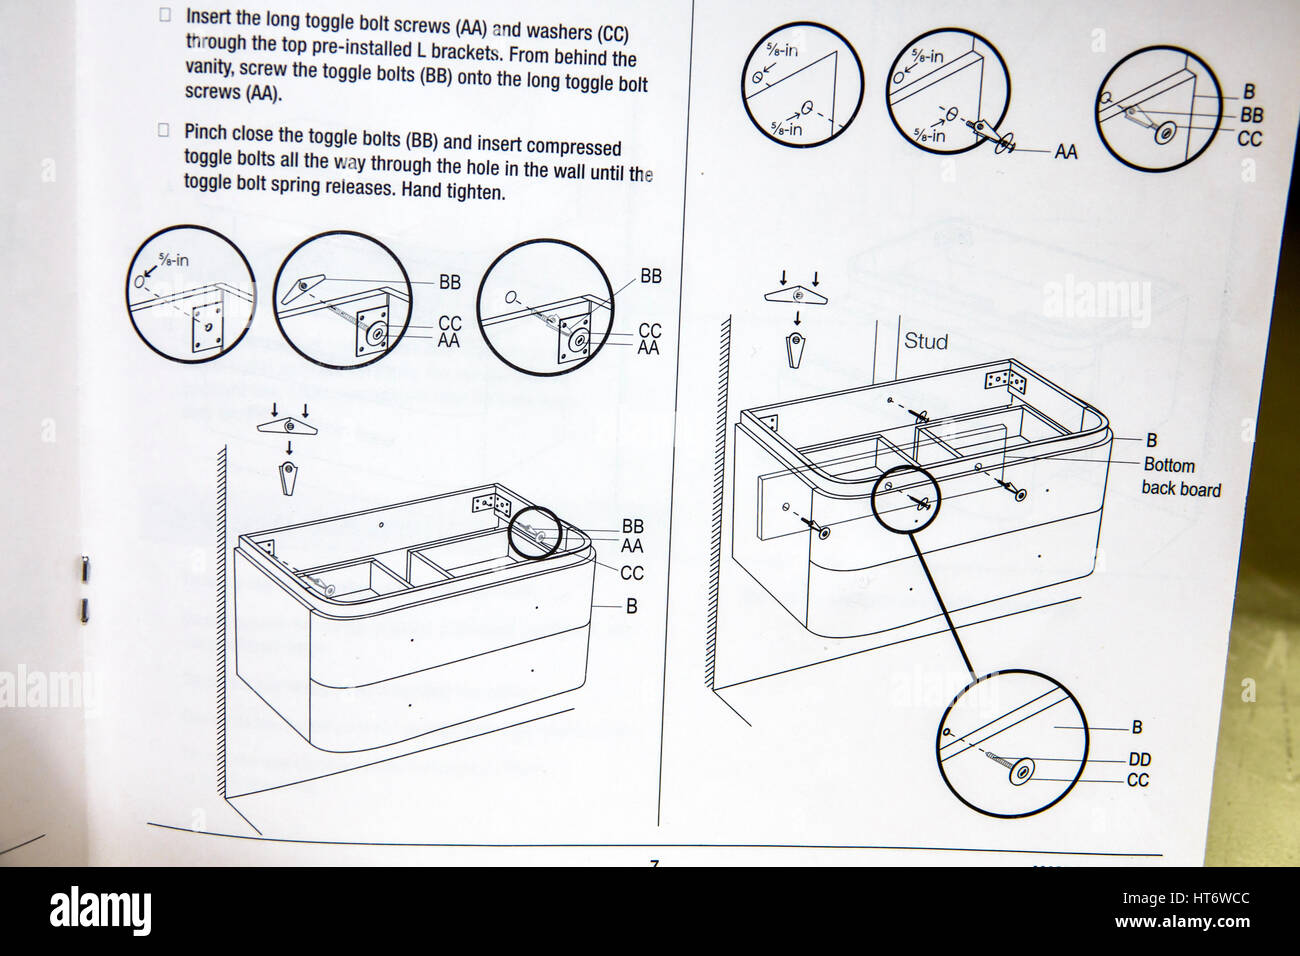 Florida South,Miami,Home Depot Big-Box,bathroom sink vanity,assembly instructions,diagram,how to,visitors travel traveling tour tourist tourism landma Stock Photo